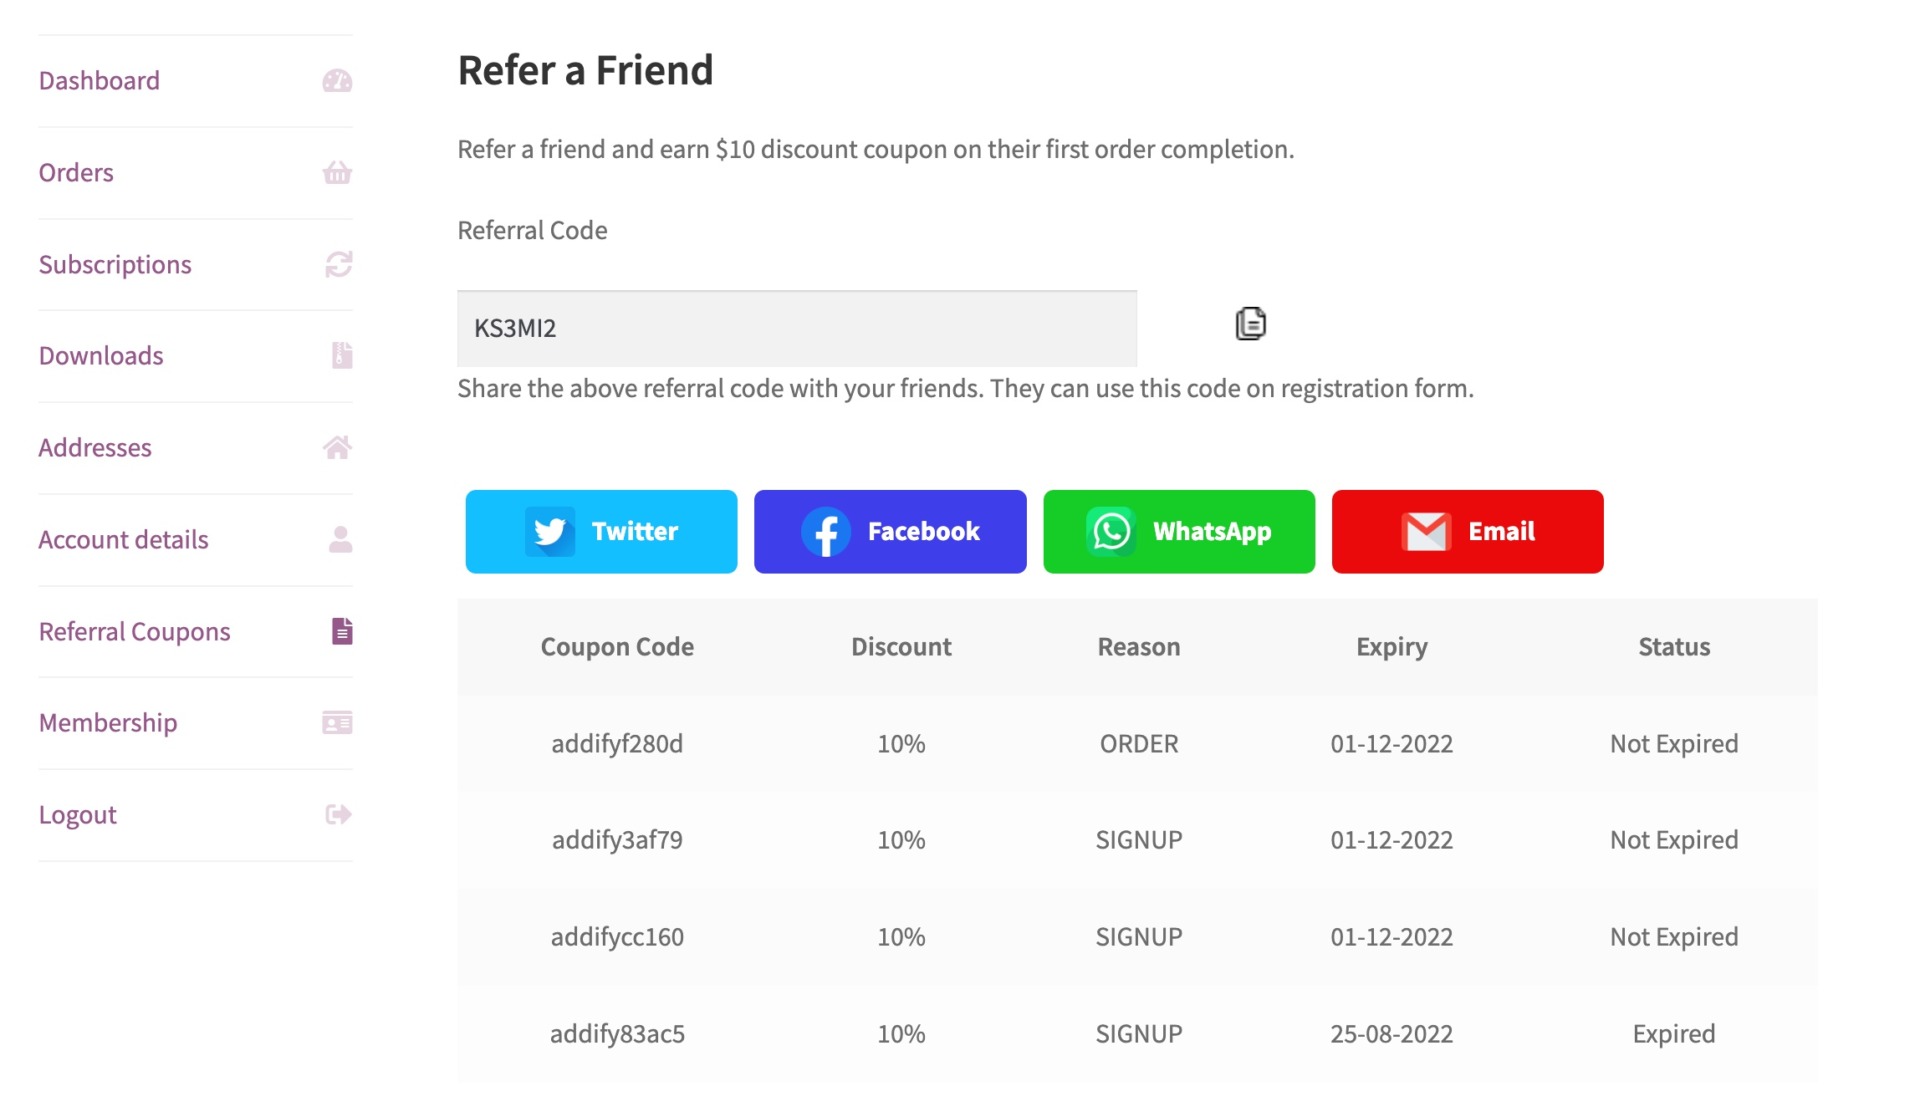 Refer a Friend My Account page